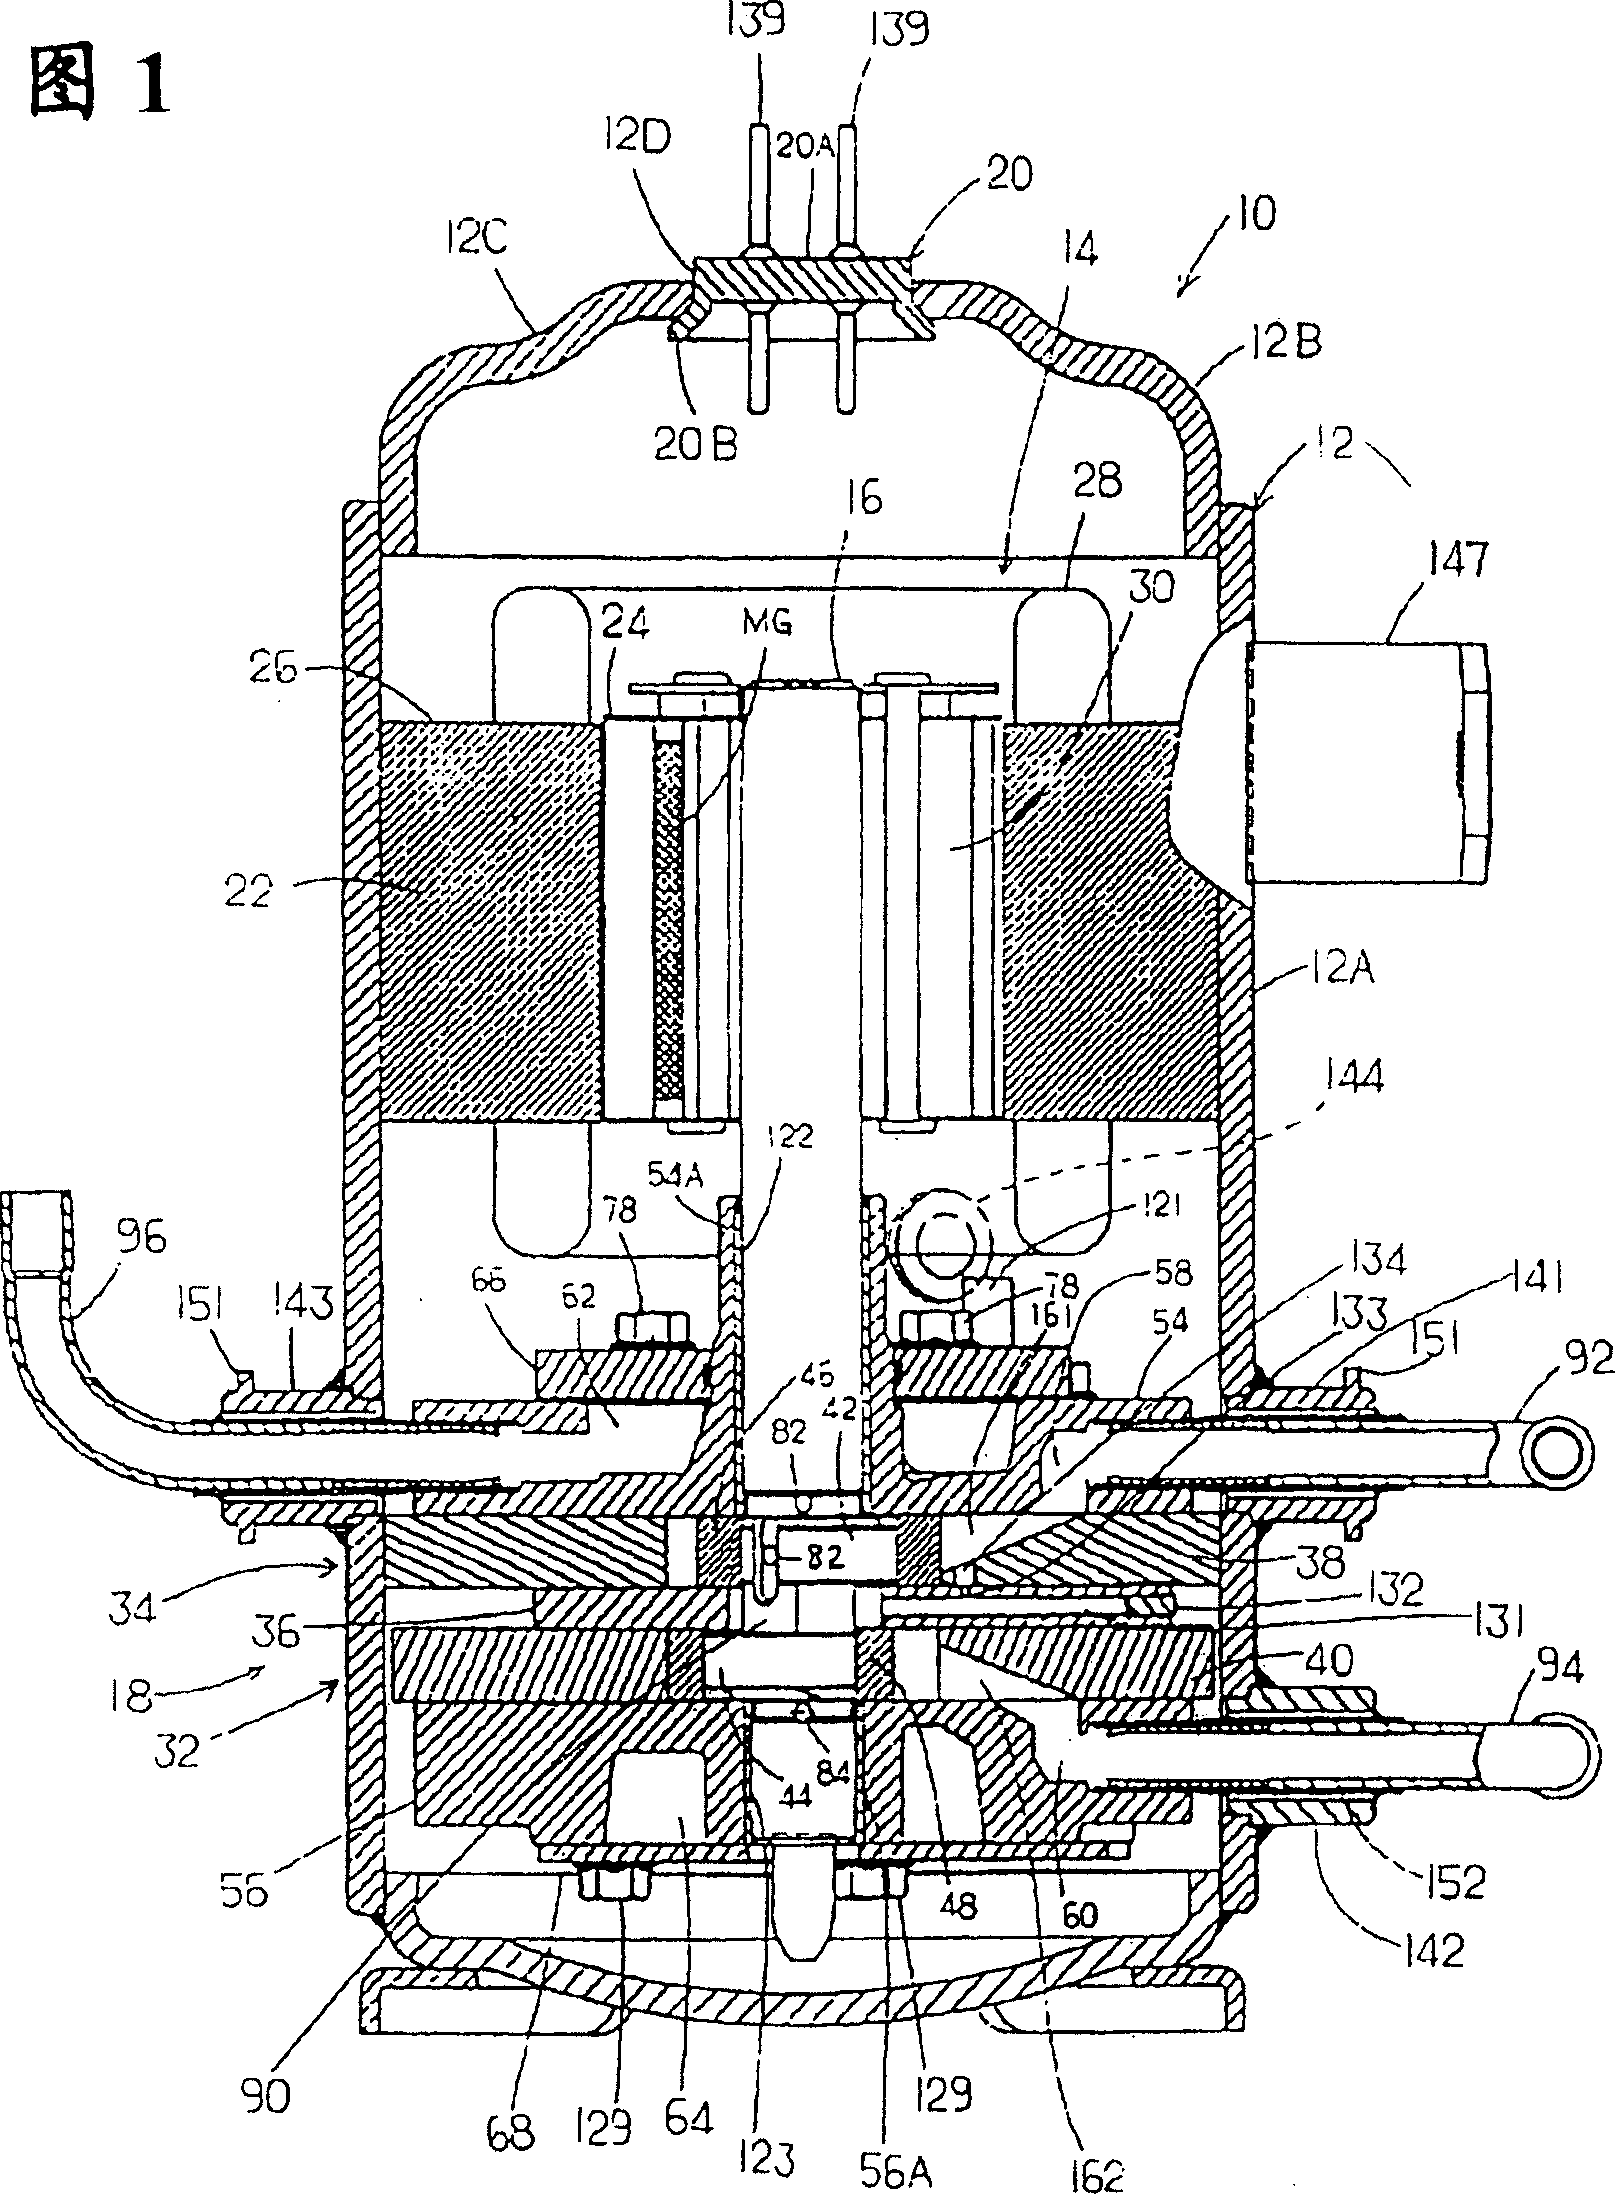 Defroster of refrigerant circuit and rotary compressor